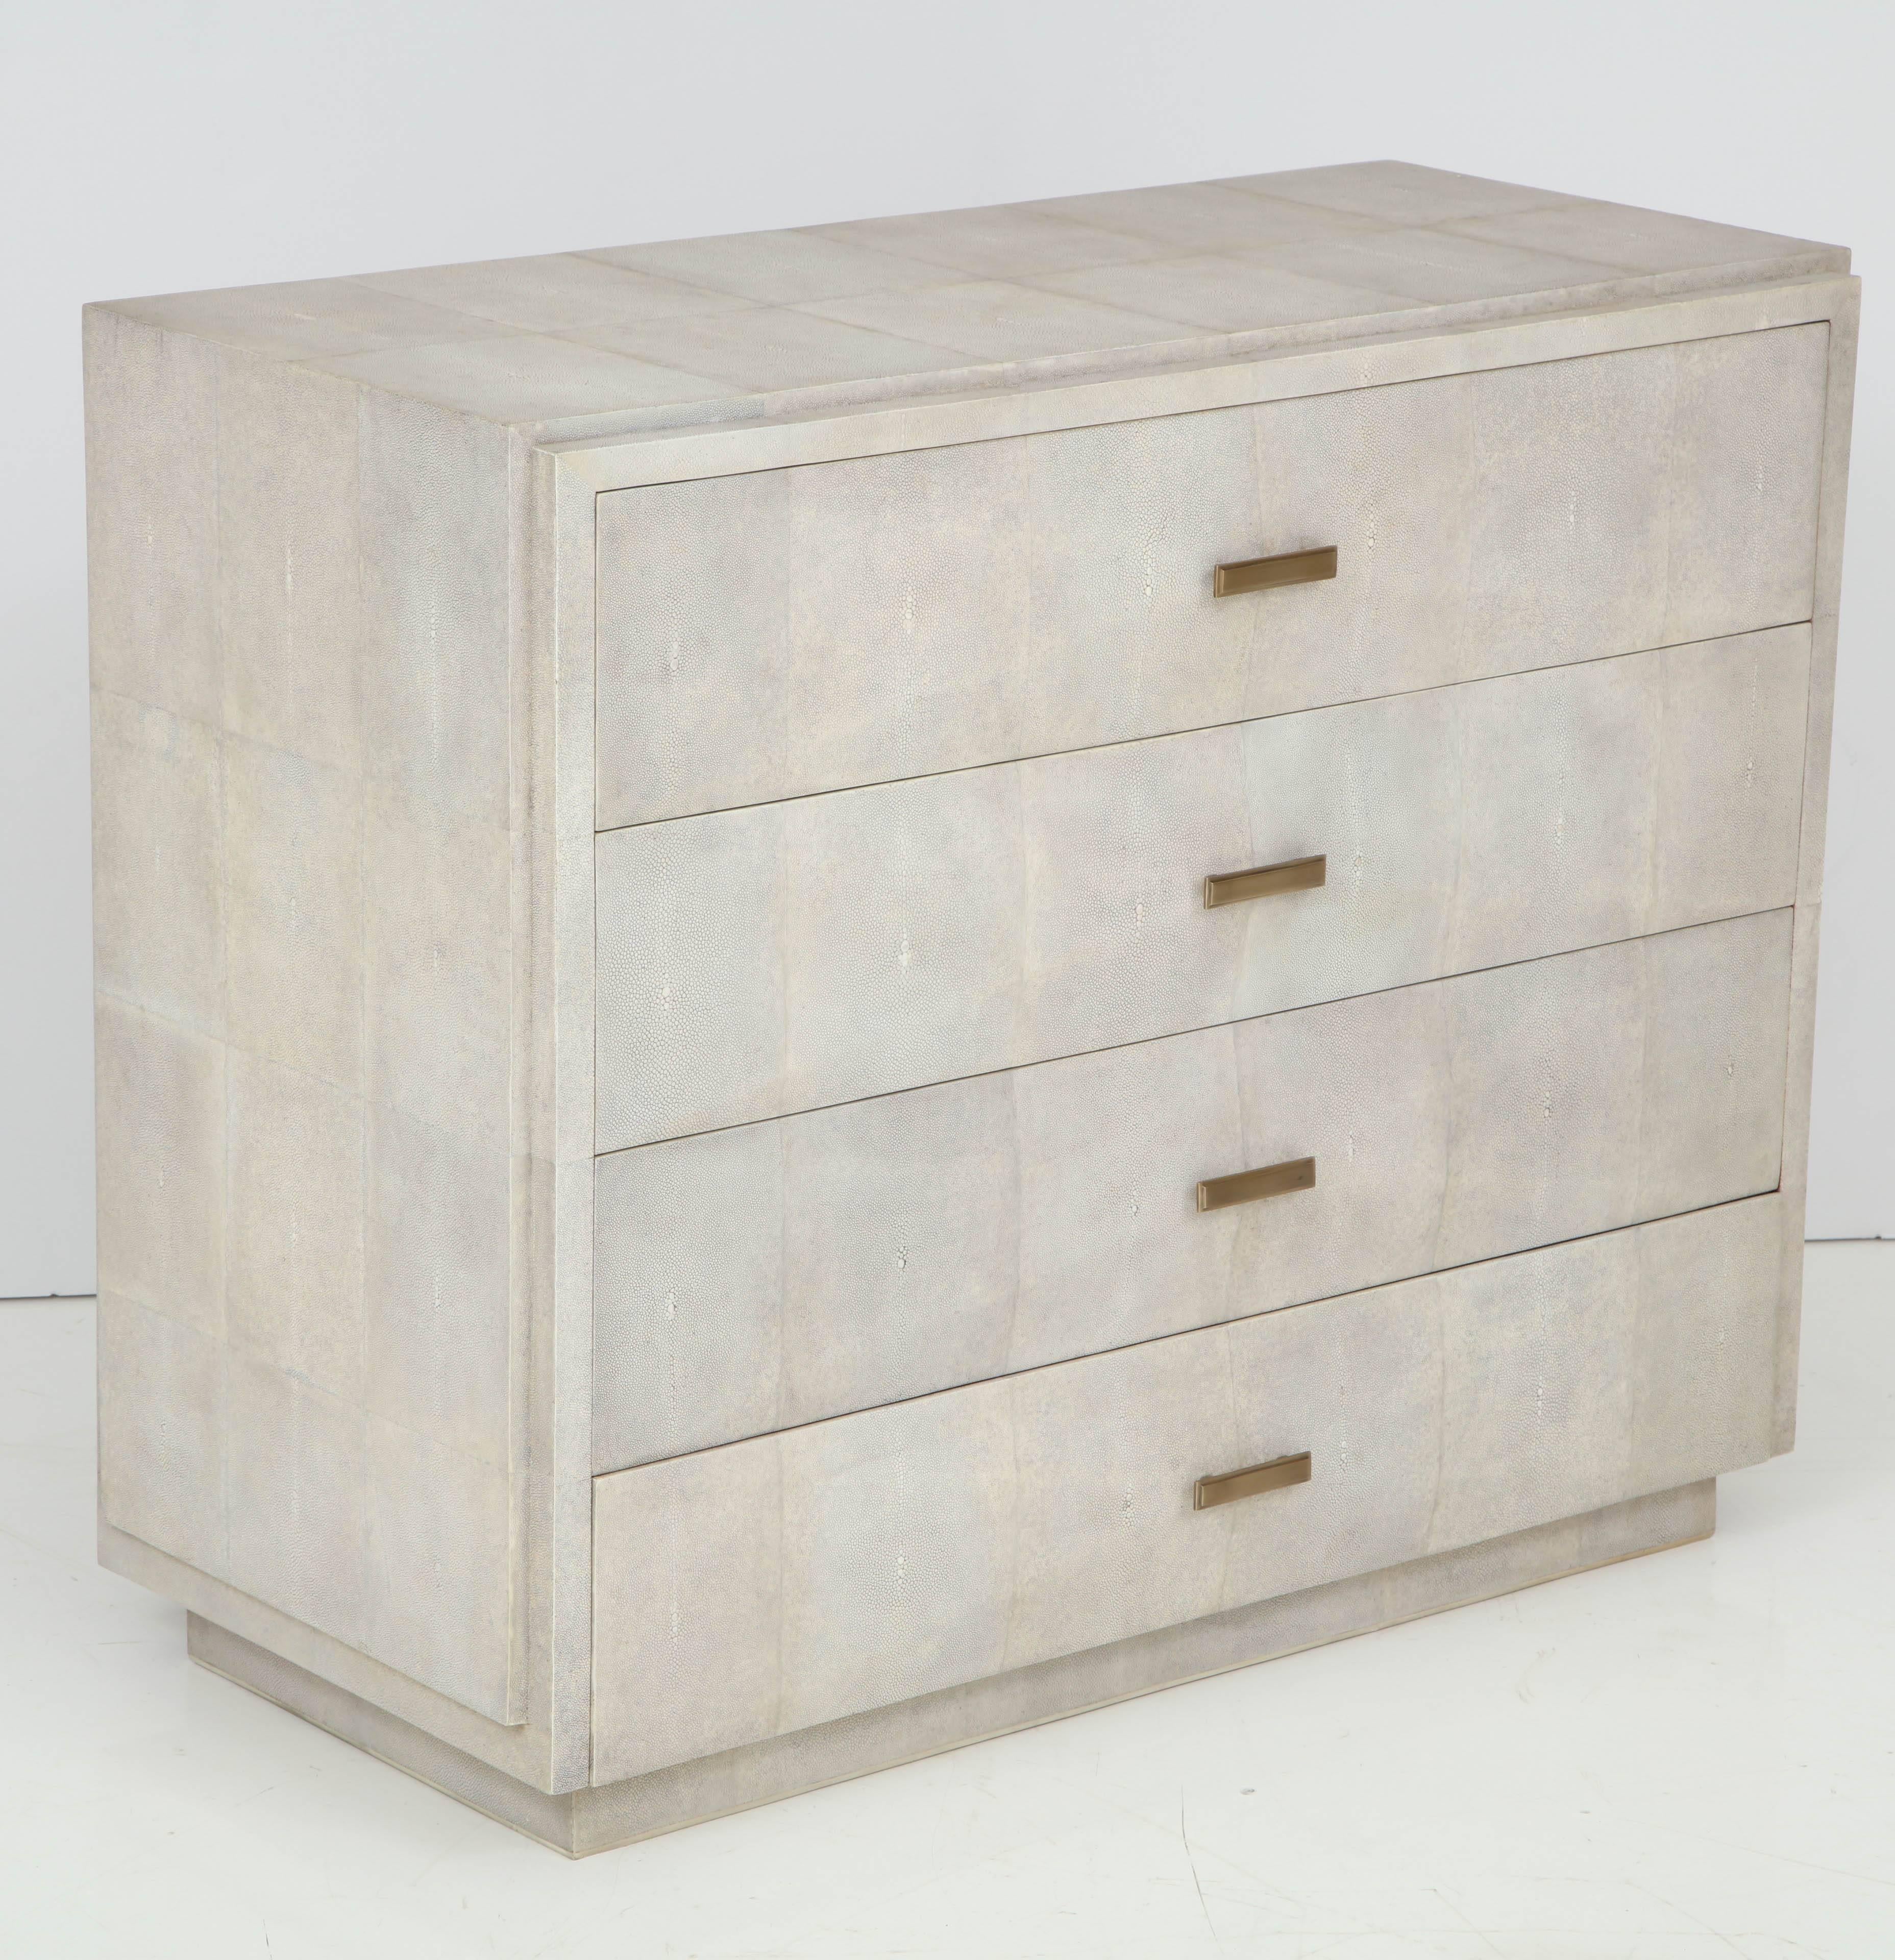 Decorative shagreen dresser with four drawers. Handles are beautifully crafted by bronze.  Delivery time is 12-15 weeks.